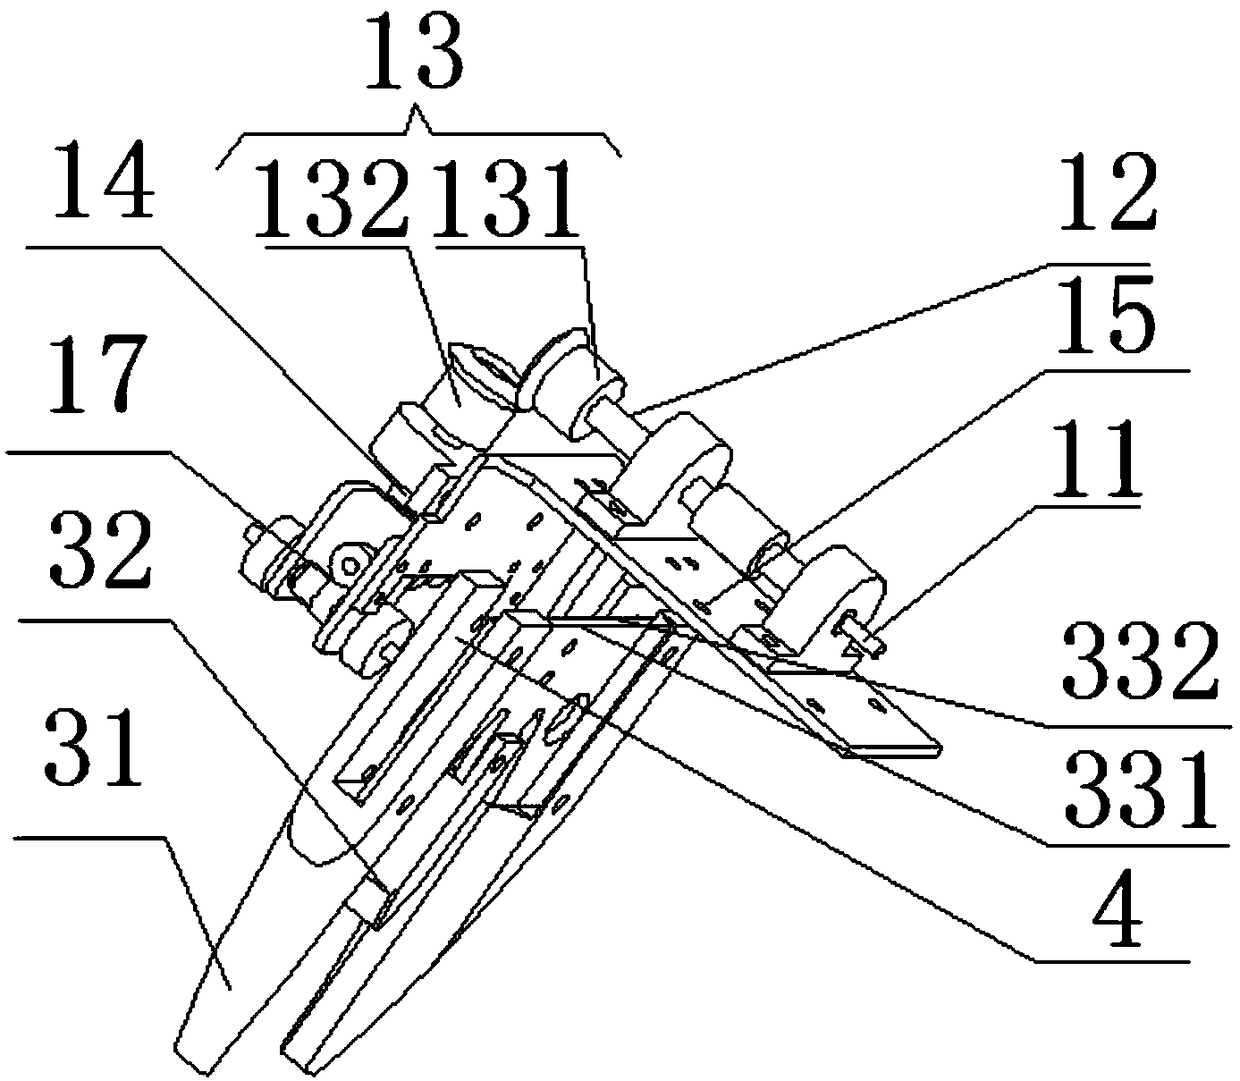 Human-assisted end-effector for citrus picking